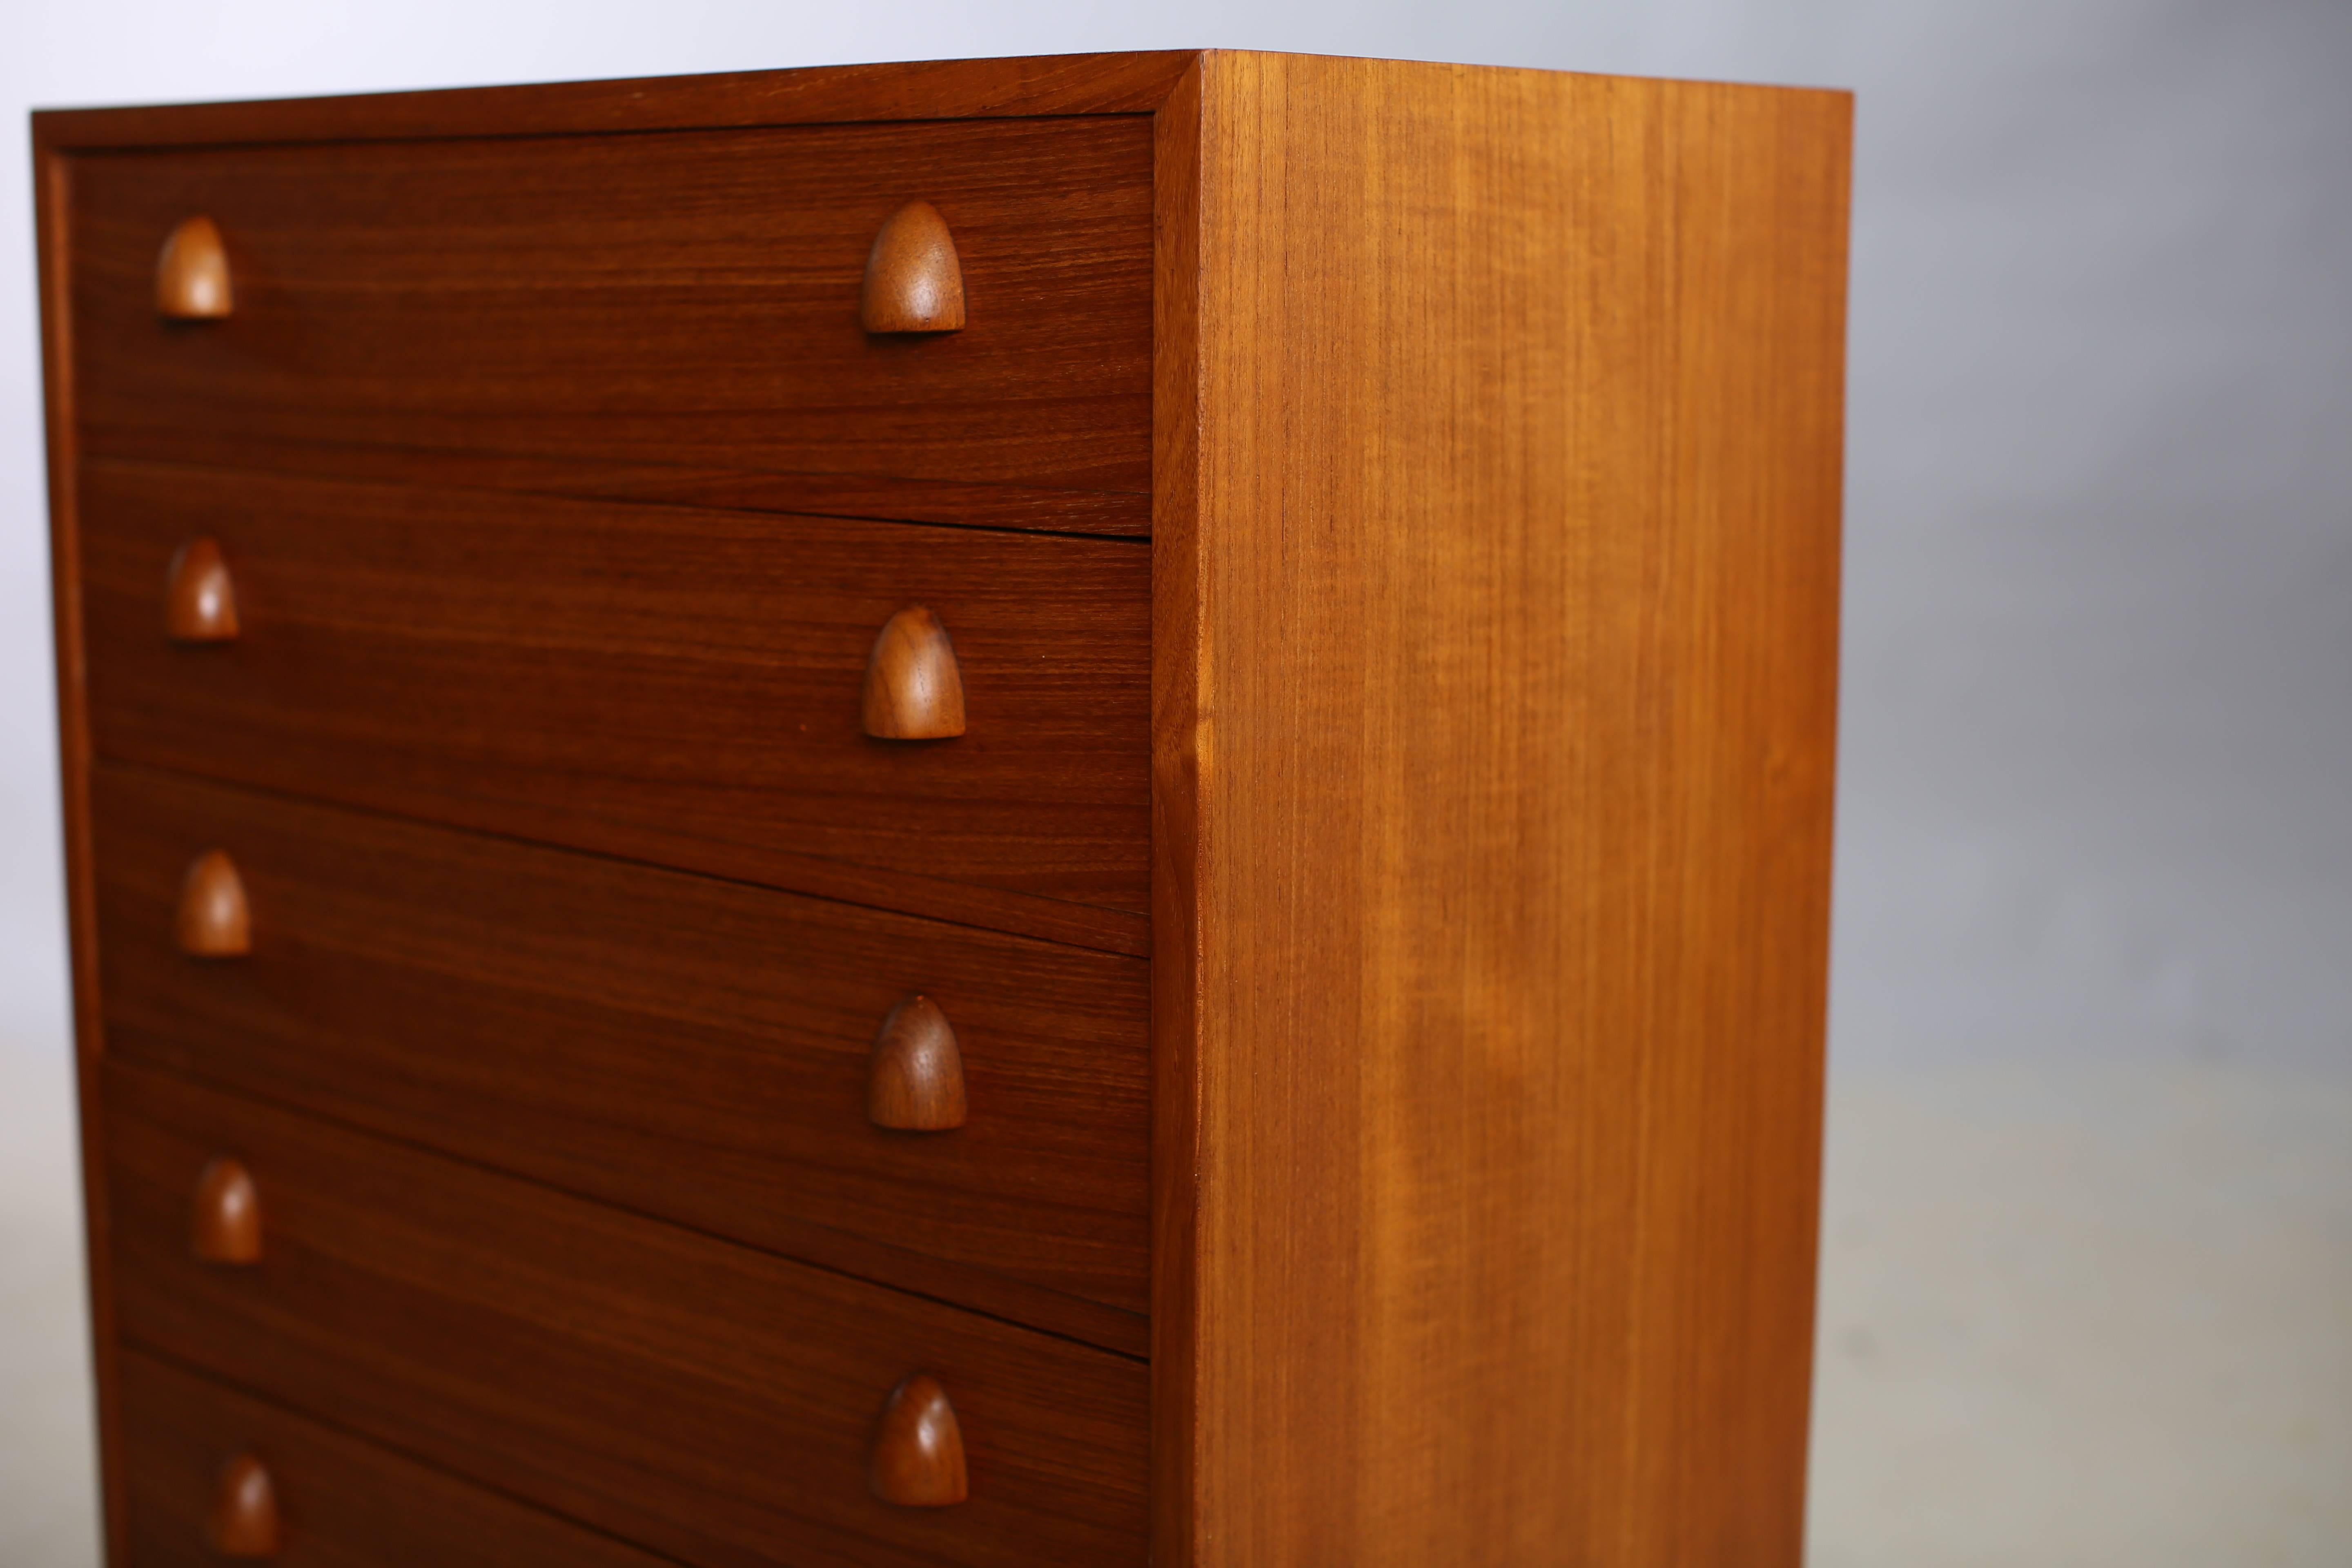 Vintage, 1960s, Mid-Century dresser.

This teak chest of drawers is in like new condition, and is exceptional quality in it's structure. Beautiful inside and out. Ready for delivery, pick up, or shipping anywhere in the world.